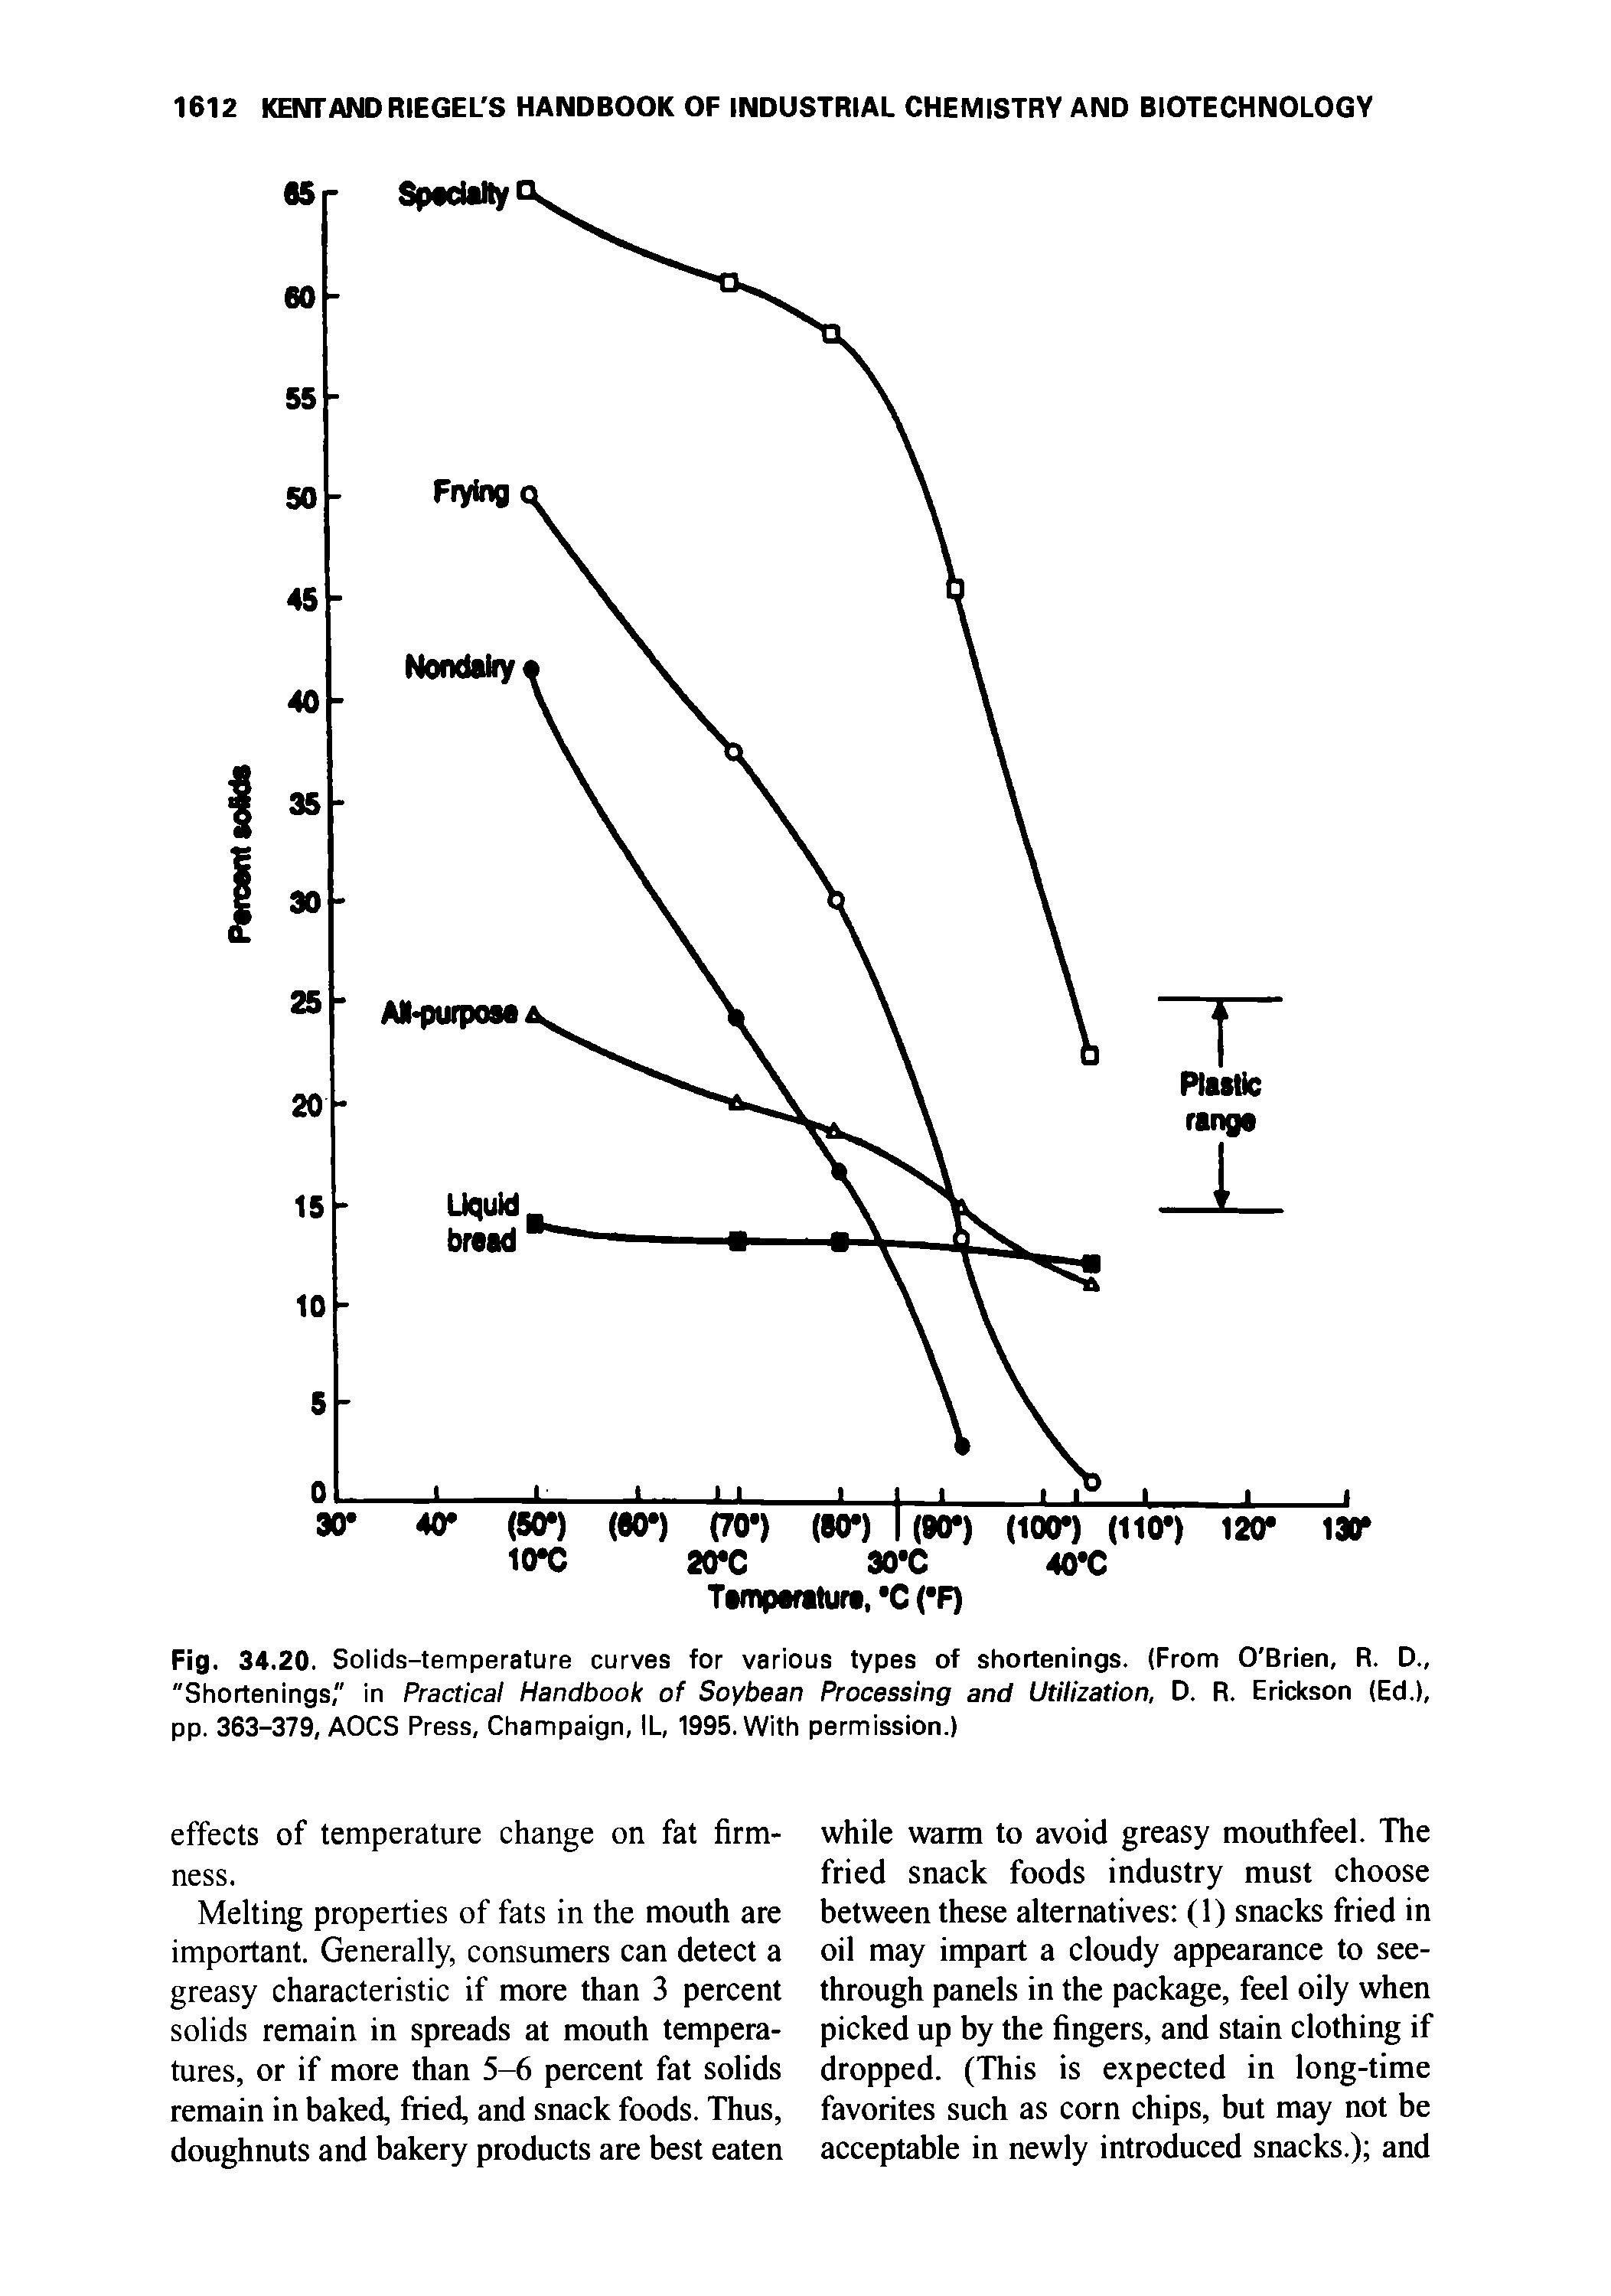 Fig. 34.20. Solids-temperature curves for various types of shortenings. (From O Brien, R. D., "Shortenings," in Practical Handbook of Soybean Processing and Utilization, D. R. Erickson (Ed.), pp. 363-379, AOCS Press, Champaign, IL, 1995. With permission.)...